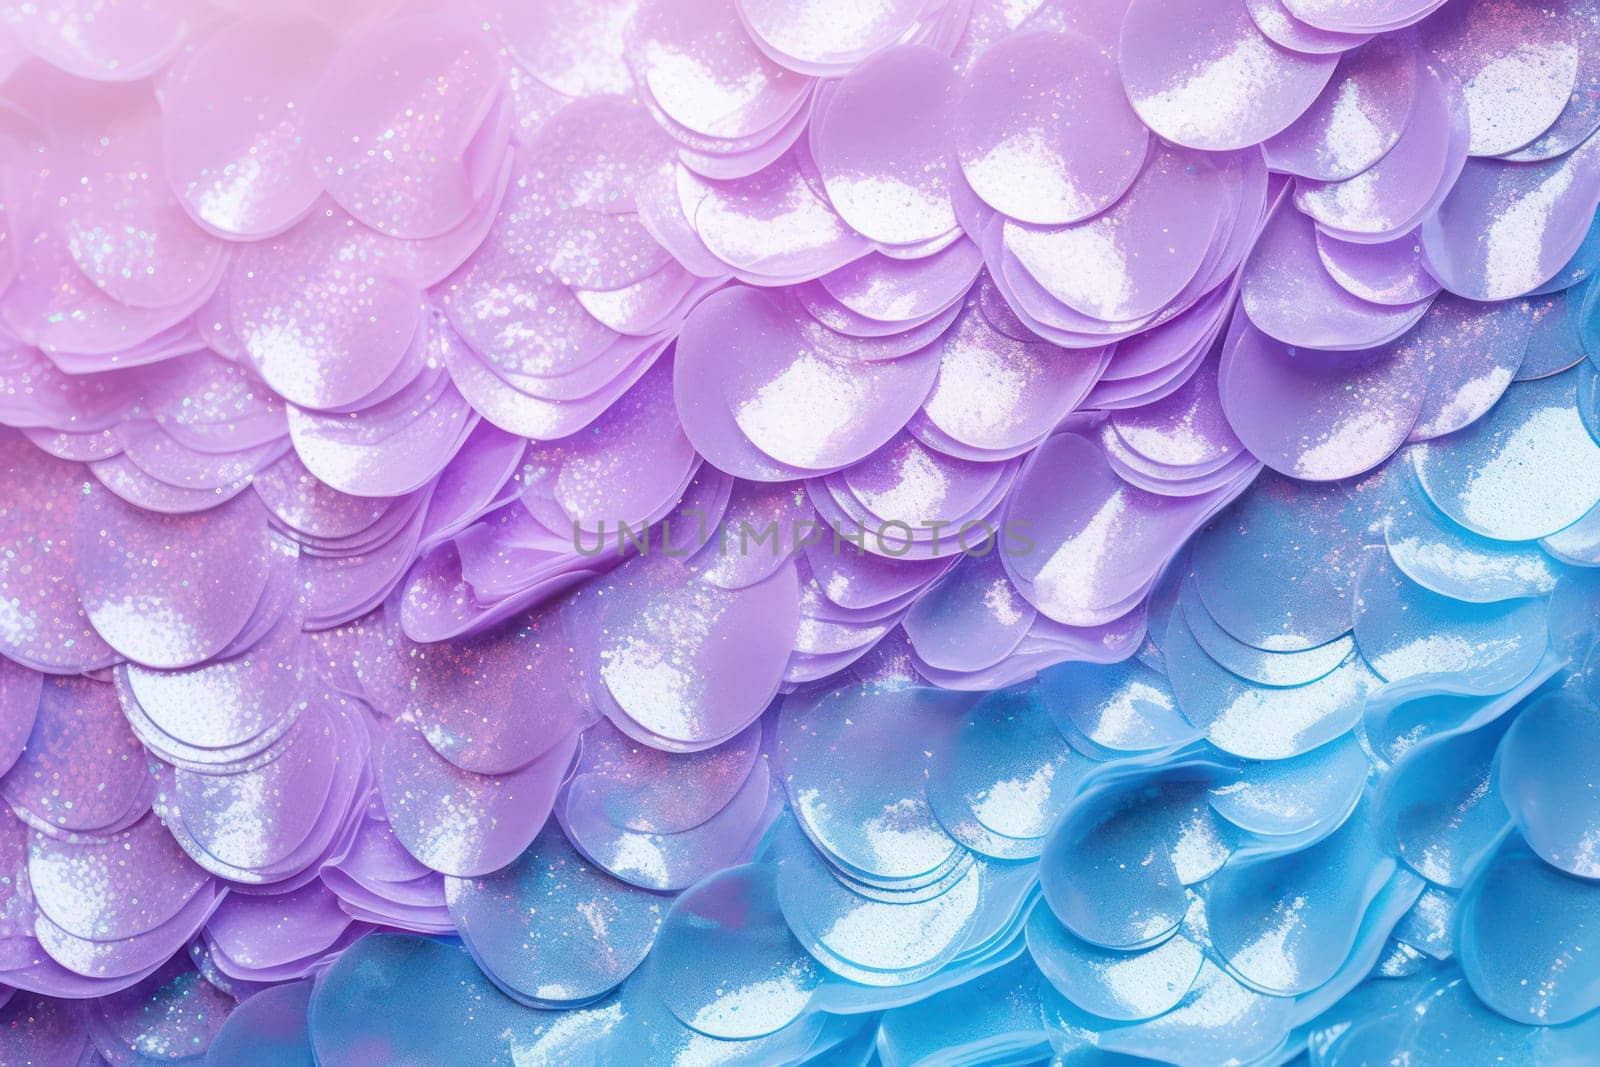 Pastel mermaid scales with glitter, transitioning from purple to blue, abstract festive background